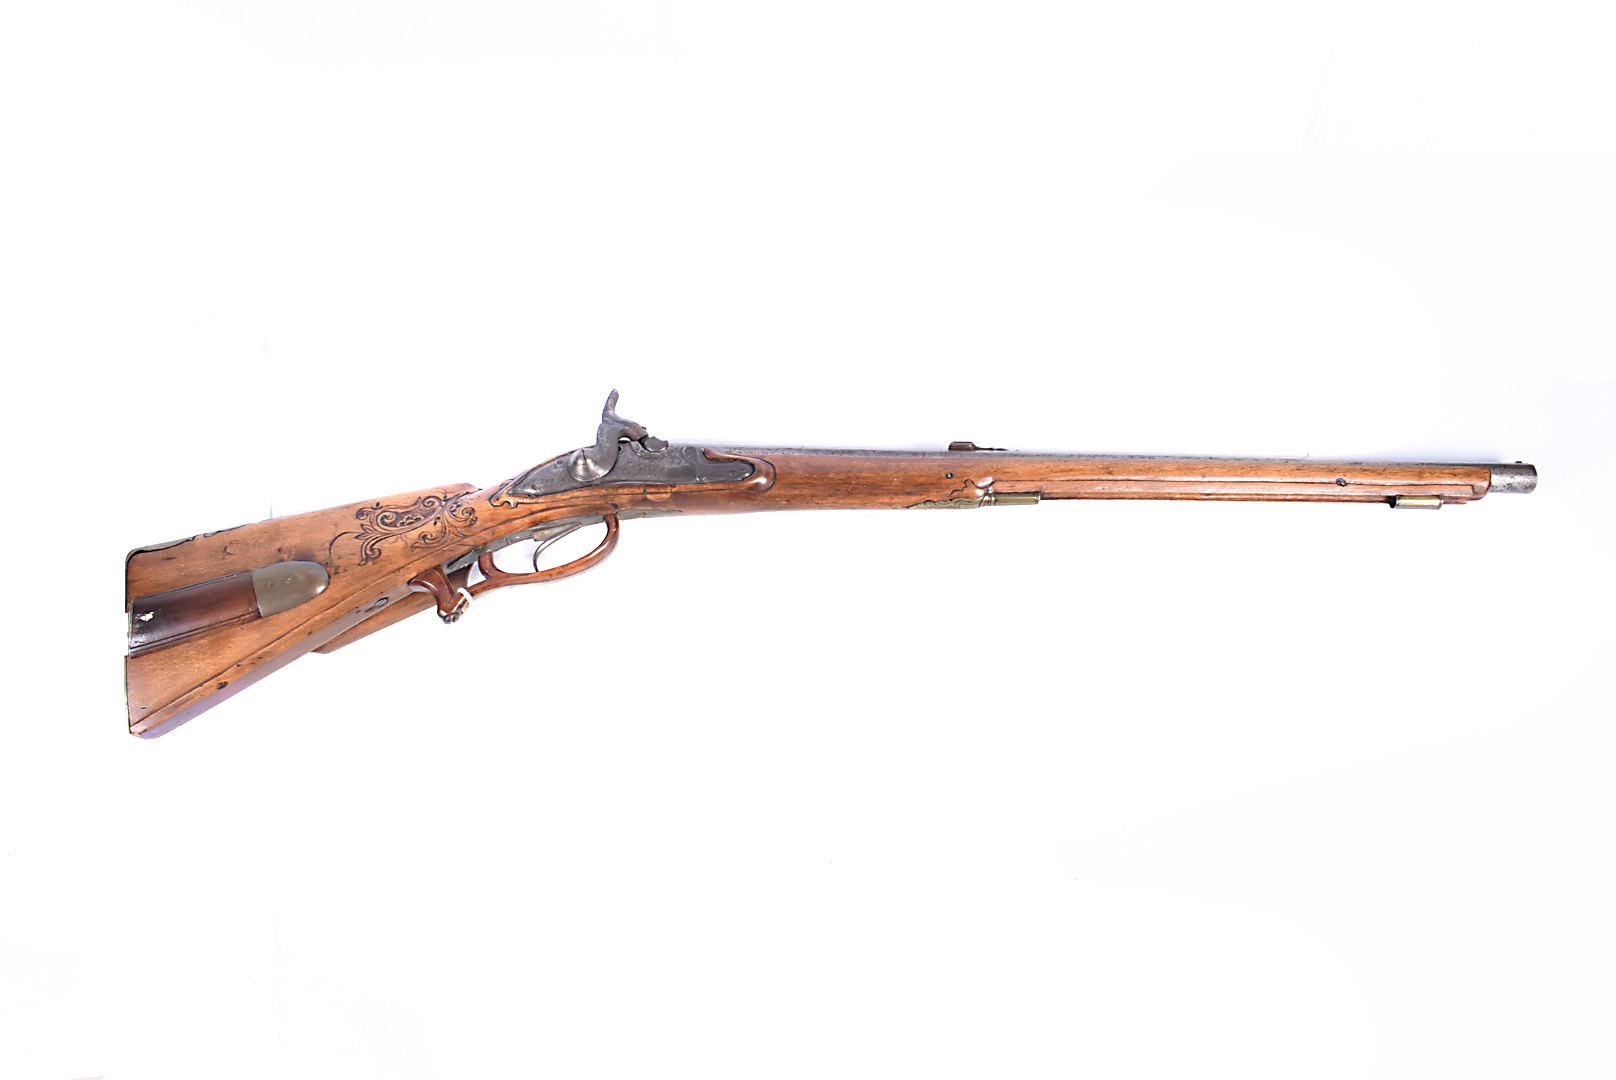 An Reproduction Austrian Decorative percussion cap carbine, with decoratively carved wooden stock,